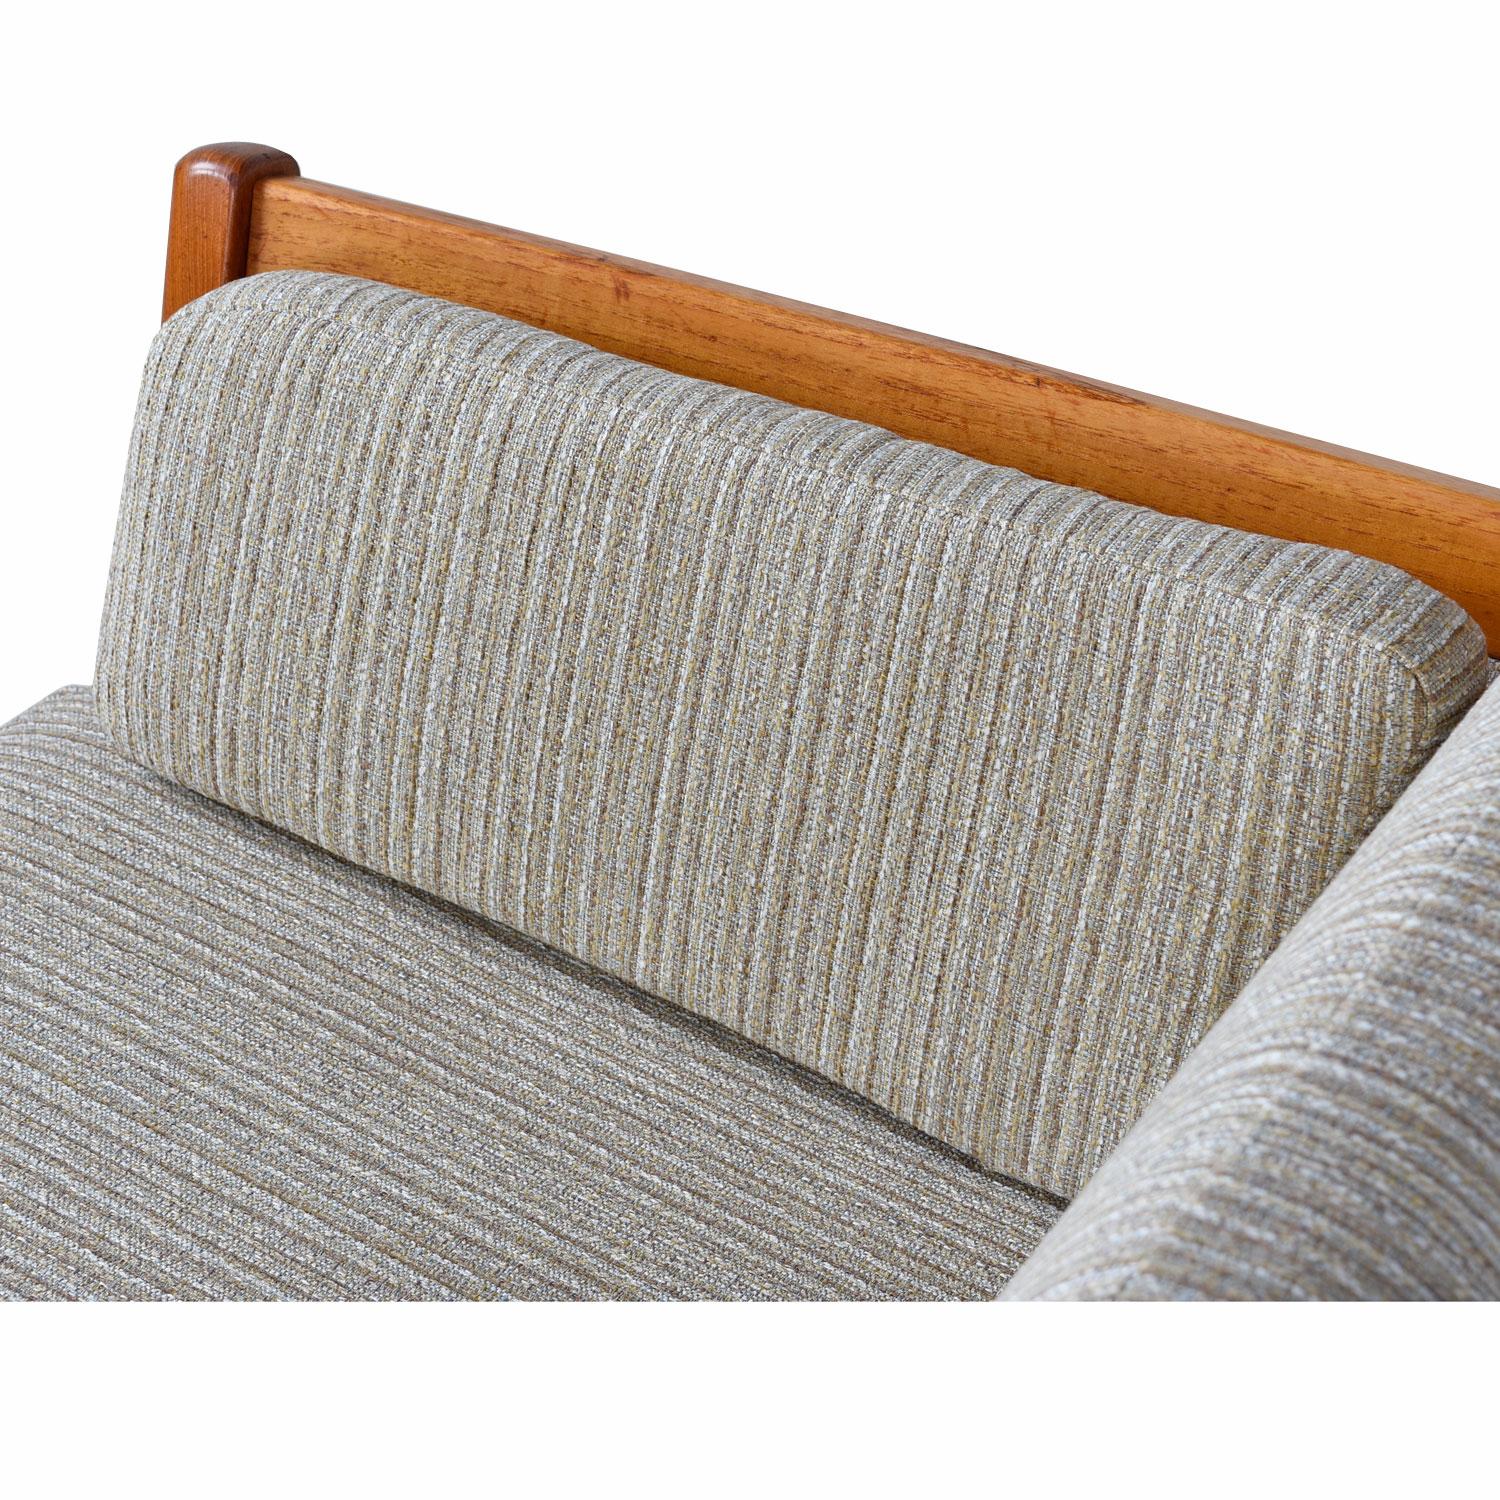 Late 20th Century Stouby Sofa 3-Seat Couch – Danish Modern Sofa with Teak Frame